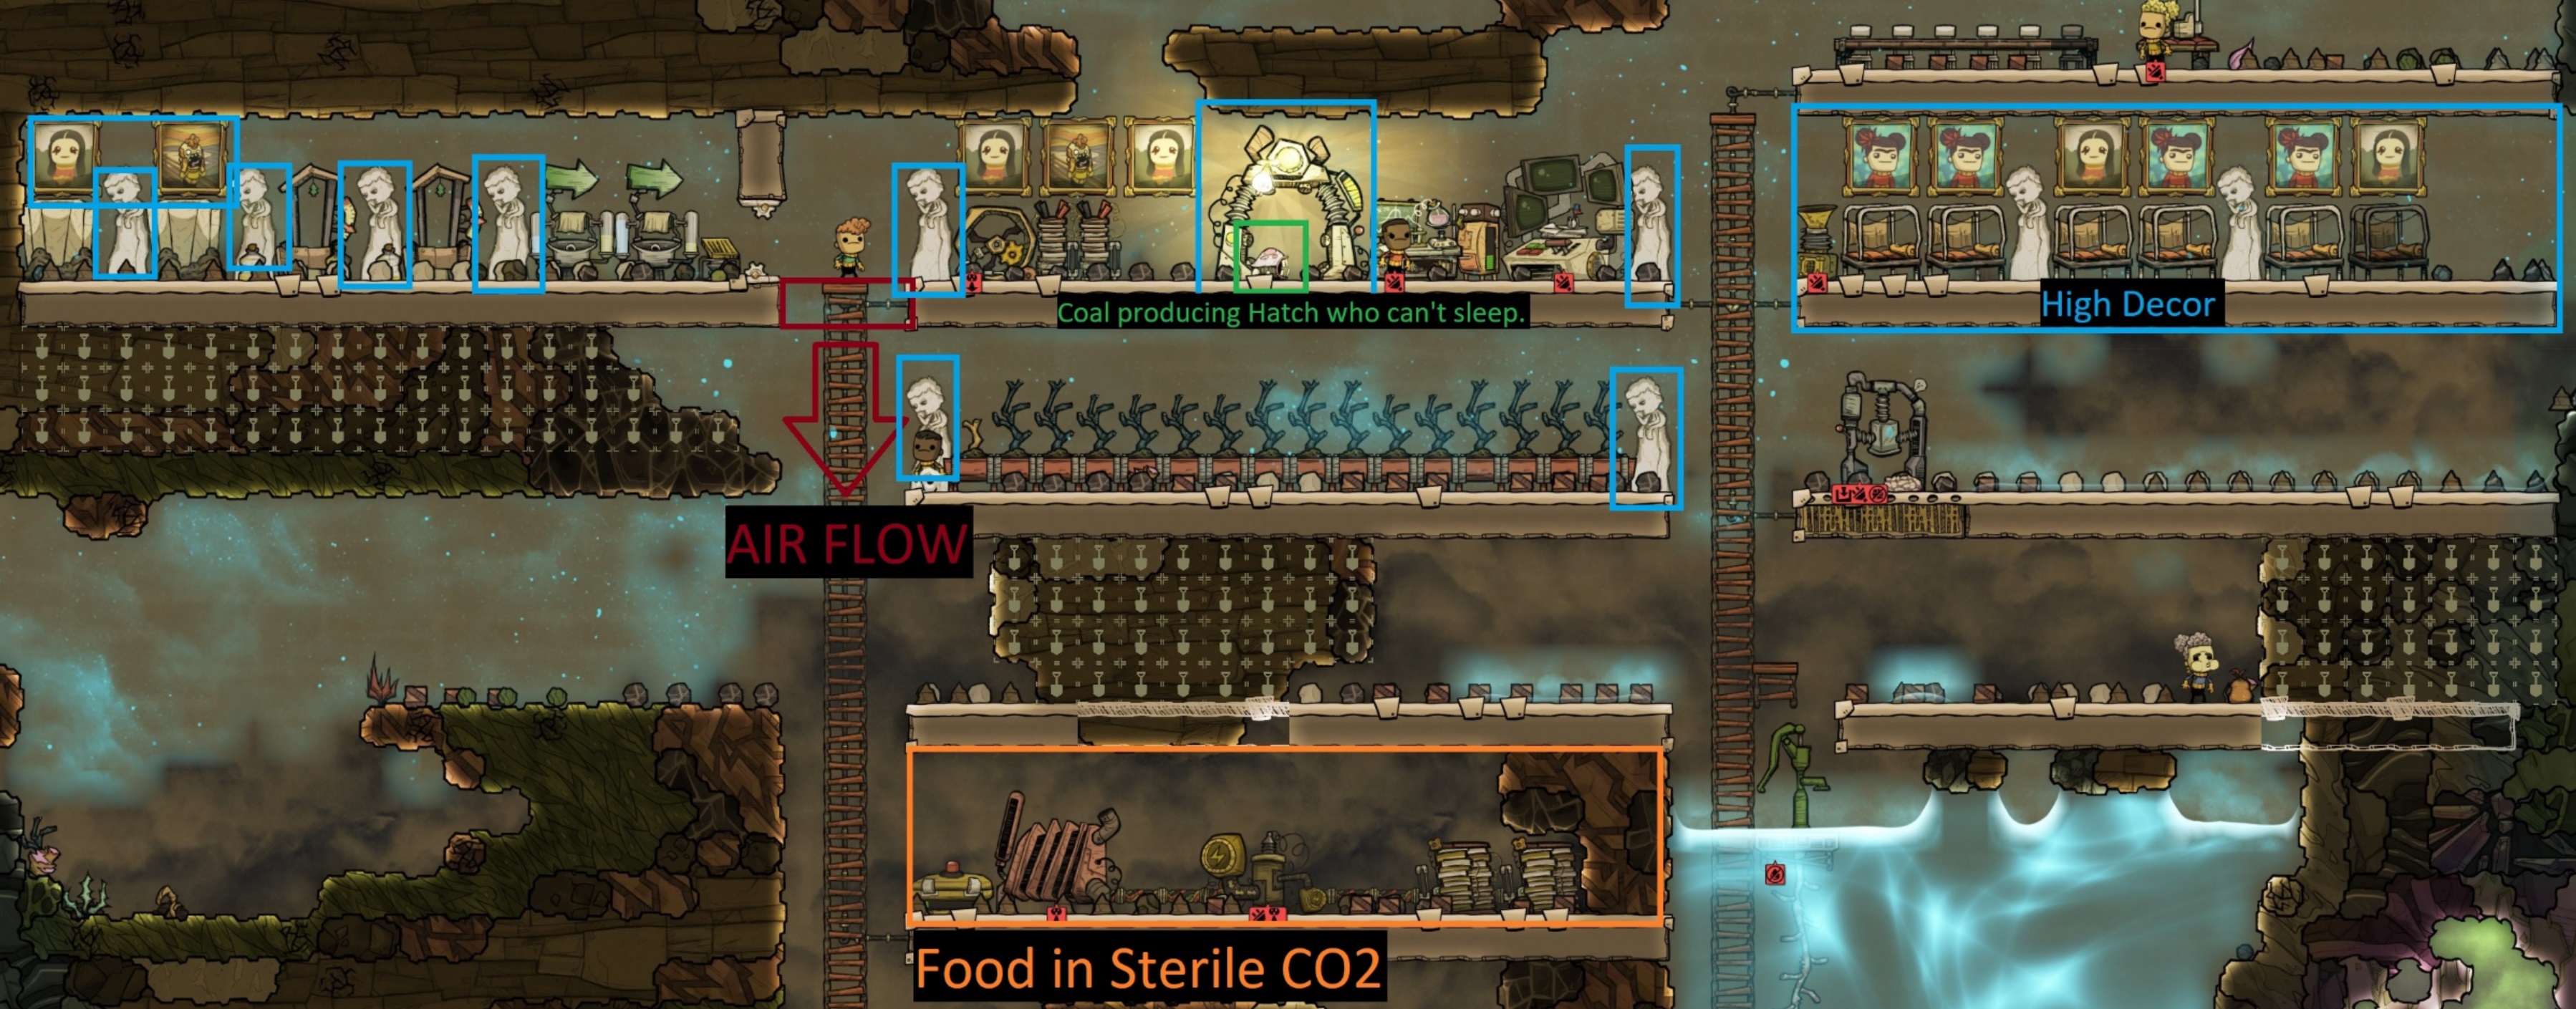 Steam Community :: Guide :: Where to find food in the game with